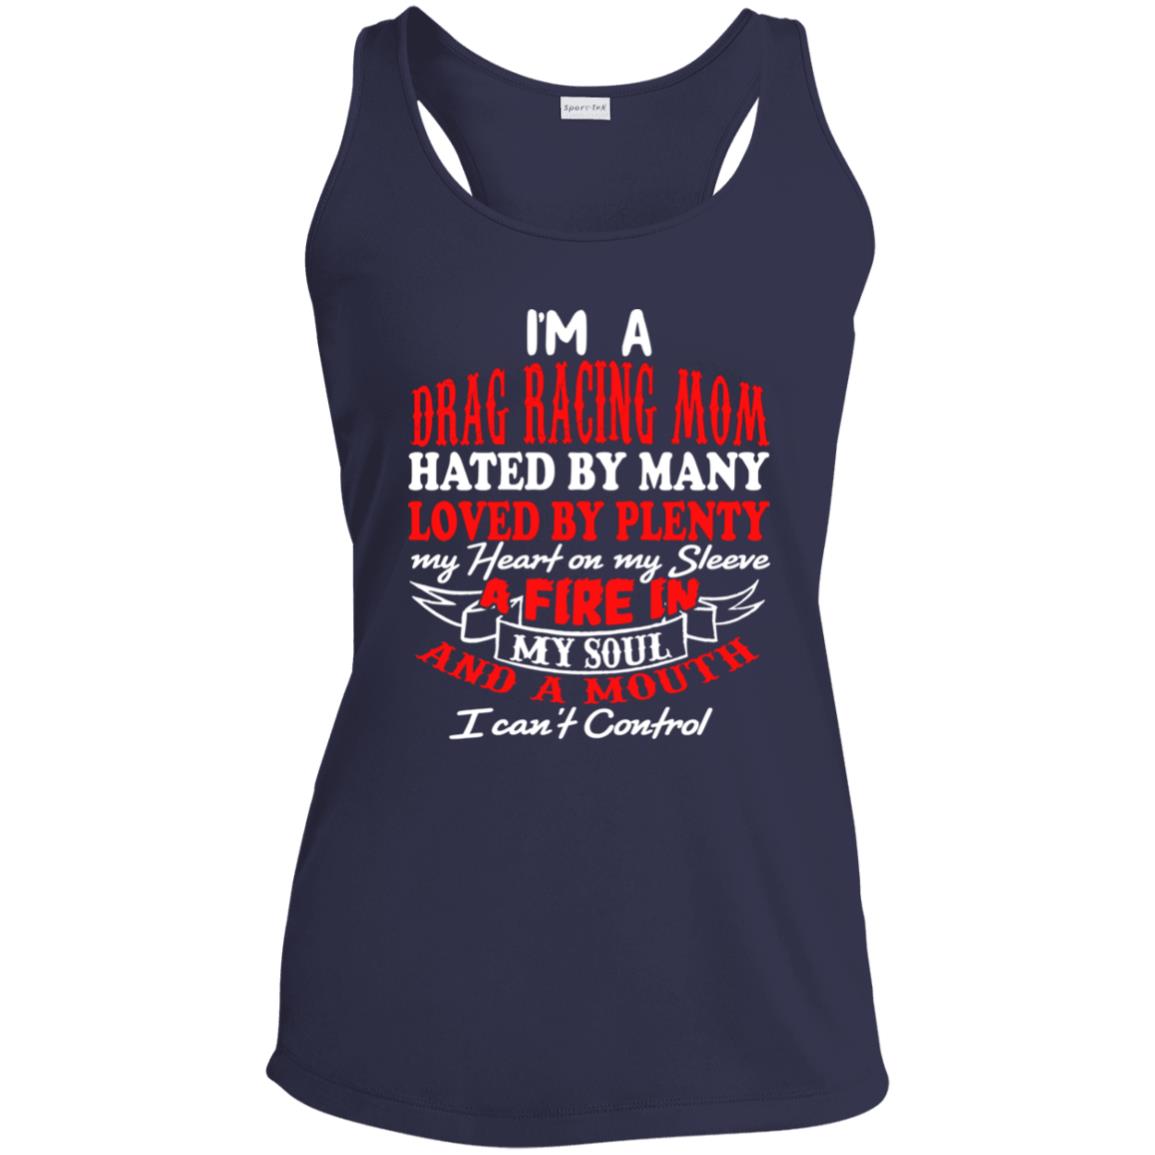 I'm A Drag Racing Mom Hated By Many Loved By Plenty Ladies' Performance Racerback Tank